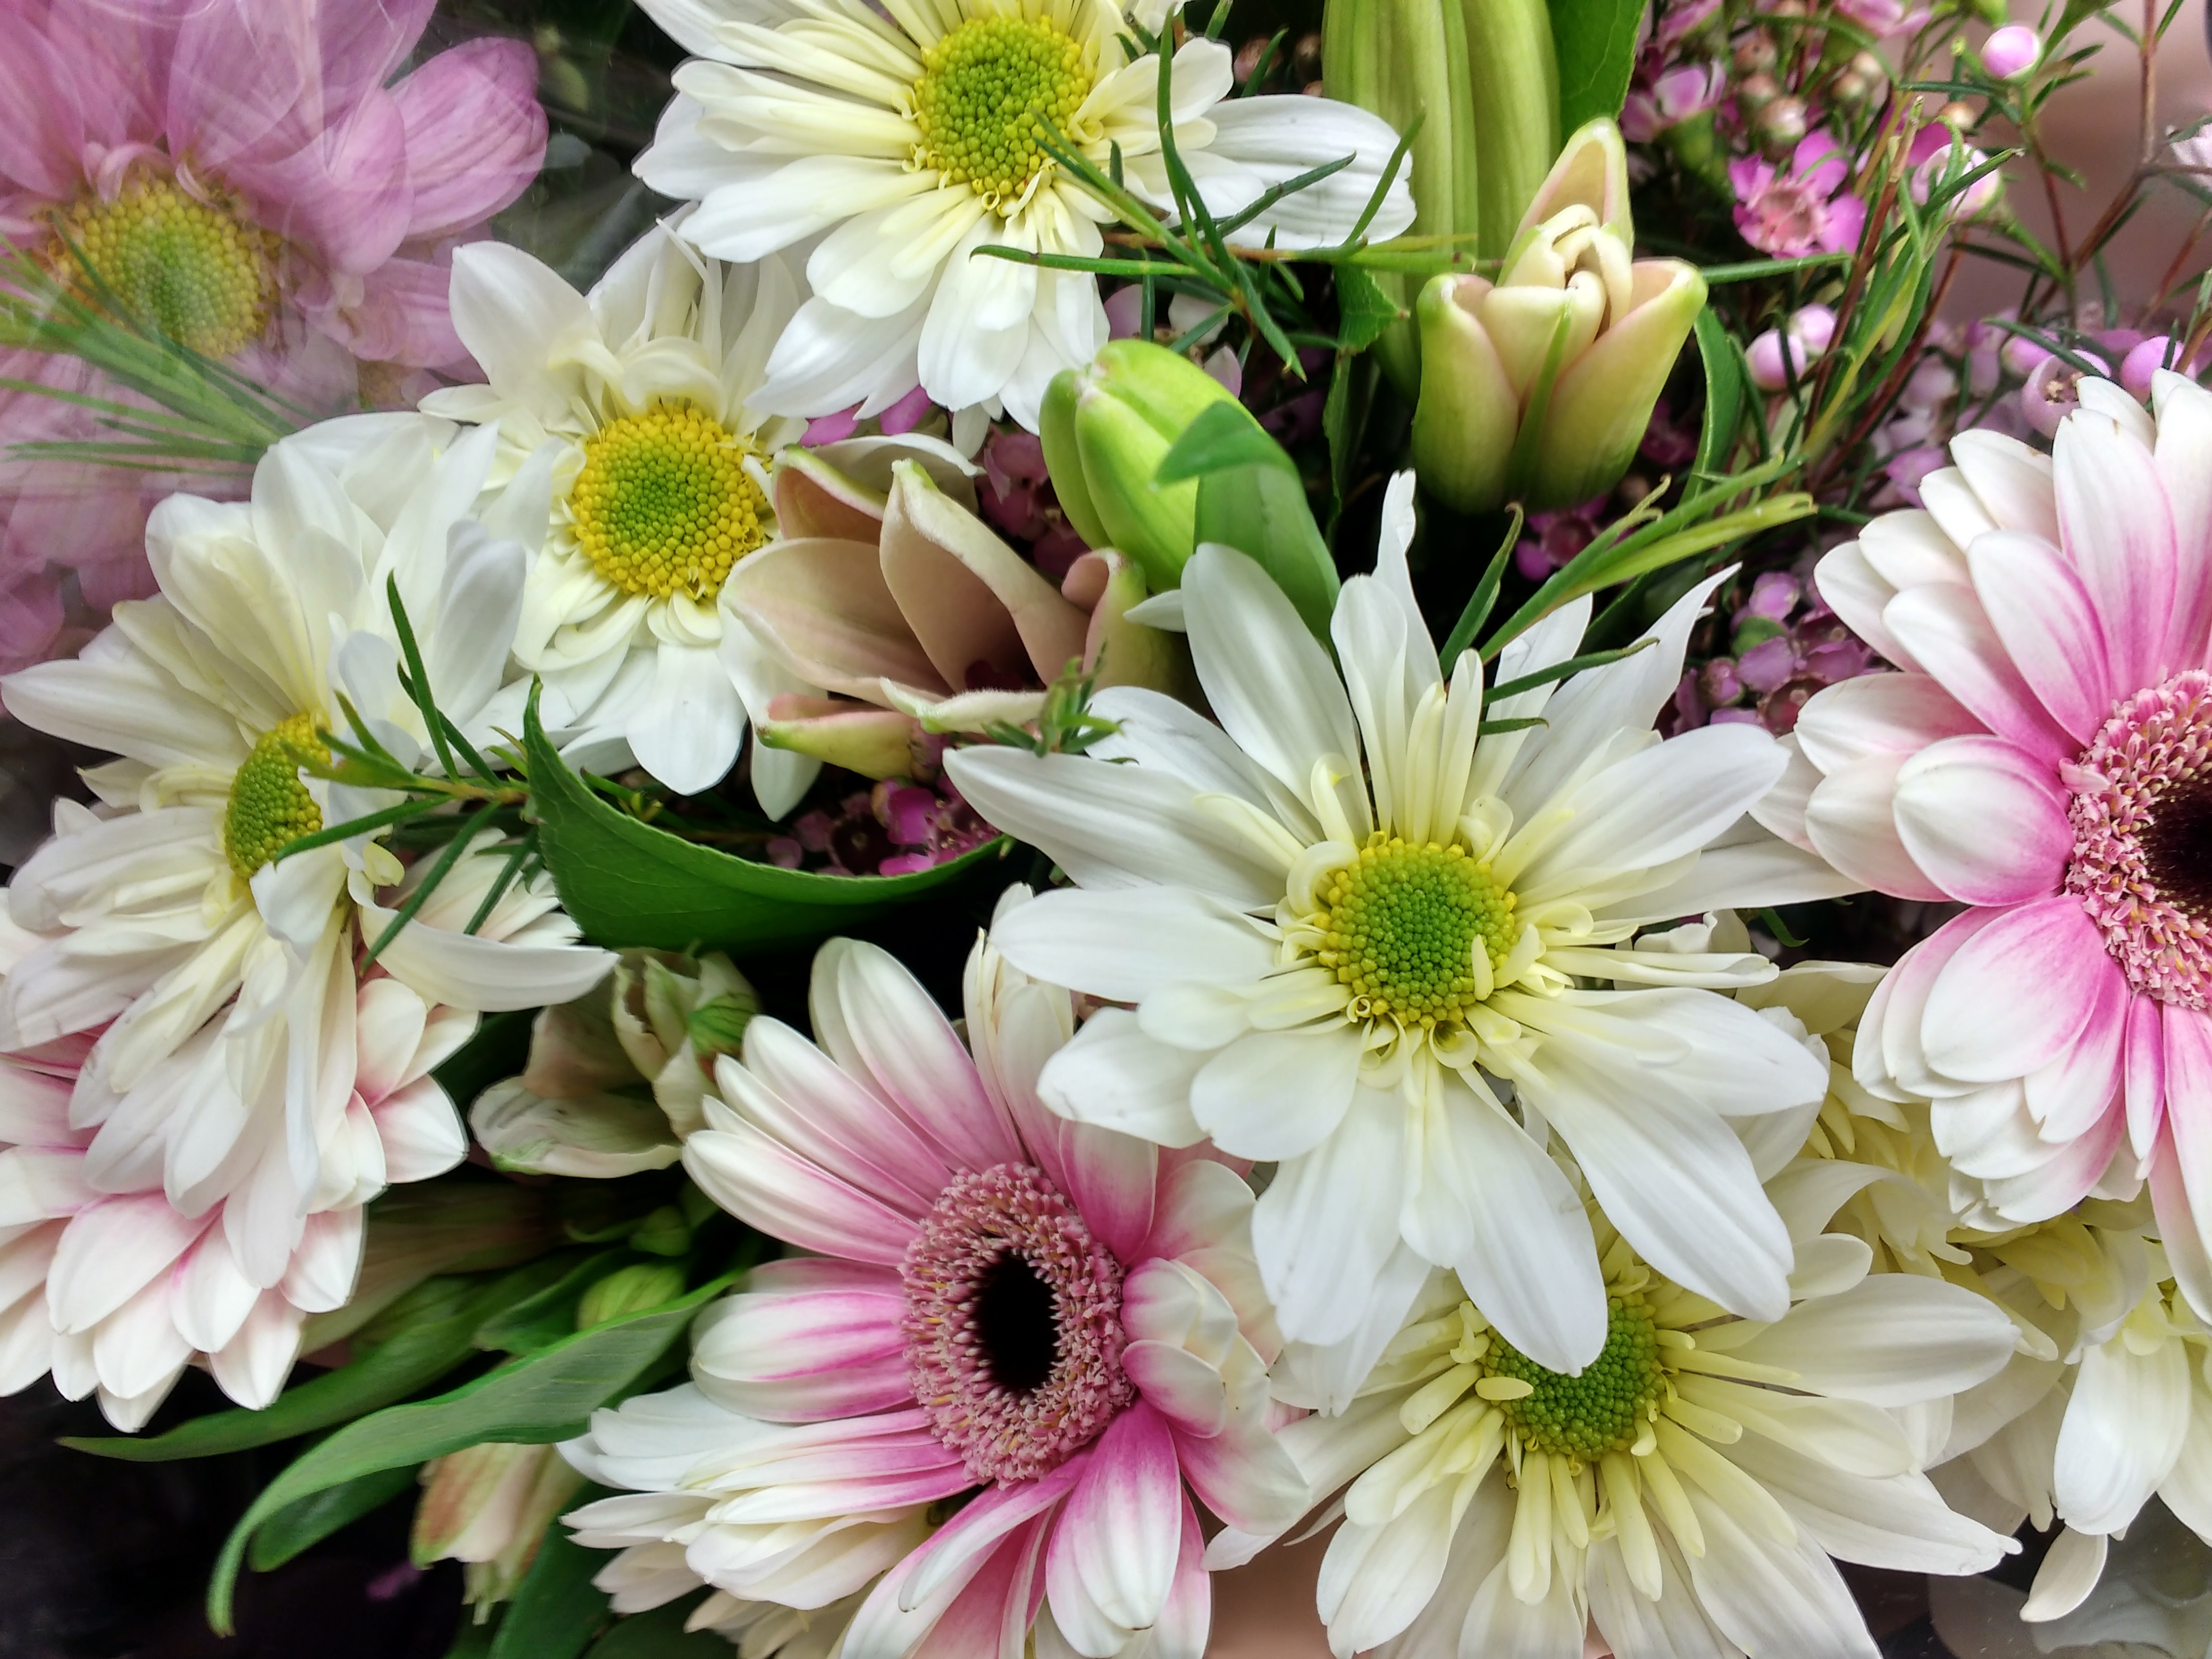 Spring Flowers Bouquet Close up Picture | Free Photograph | Photos ...